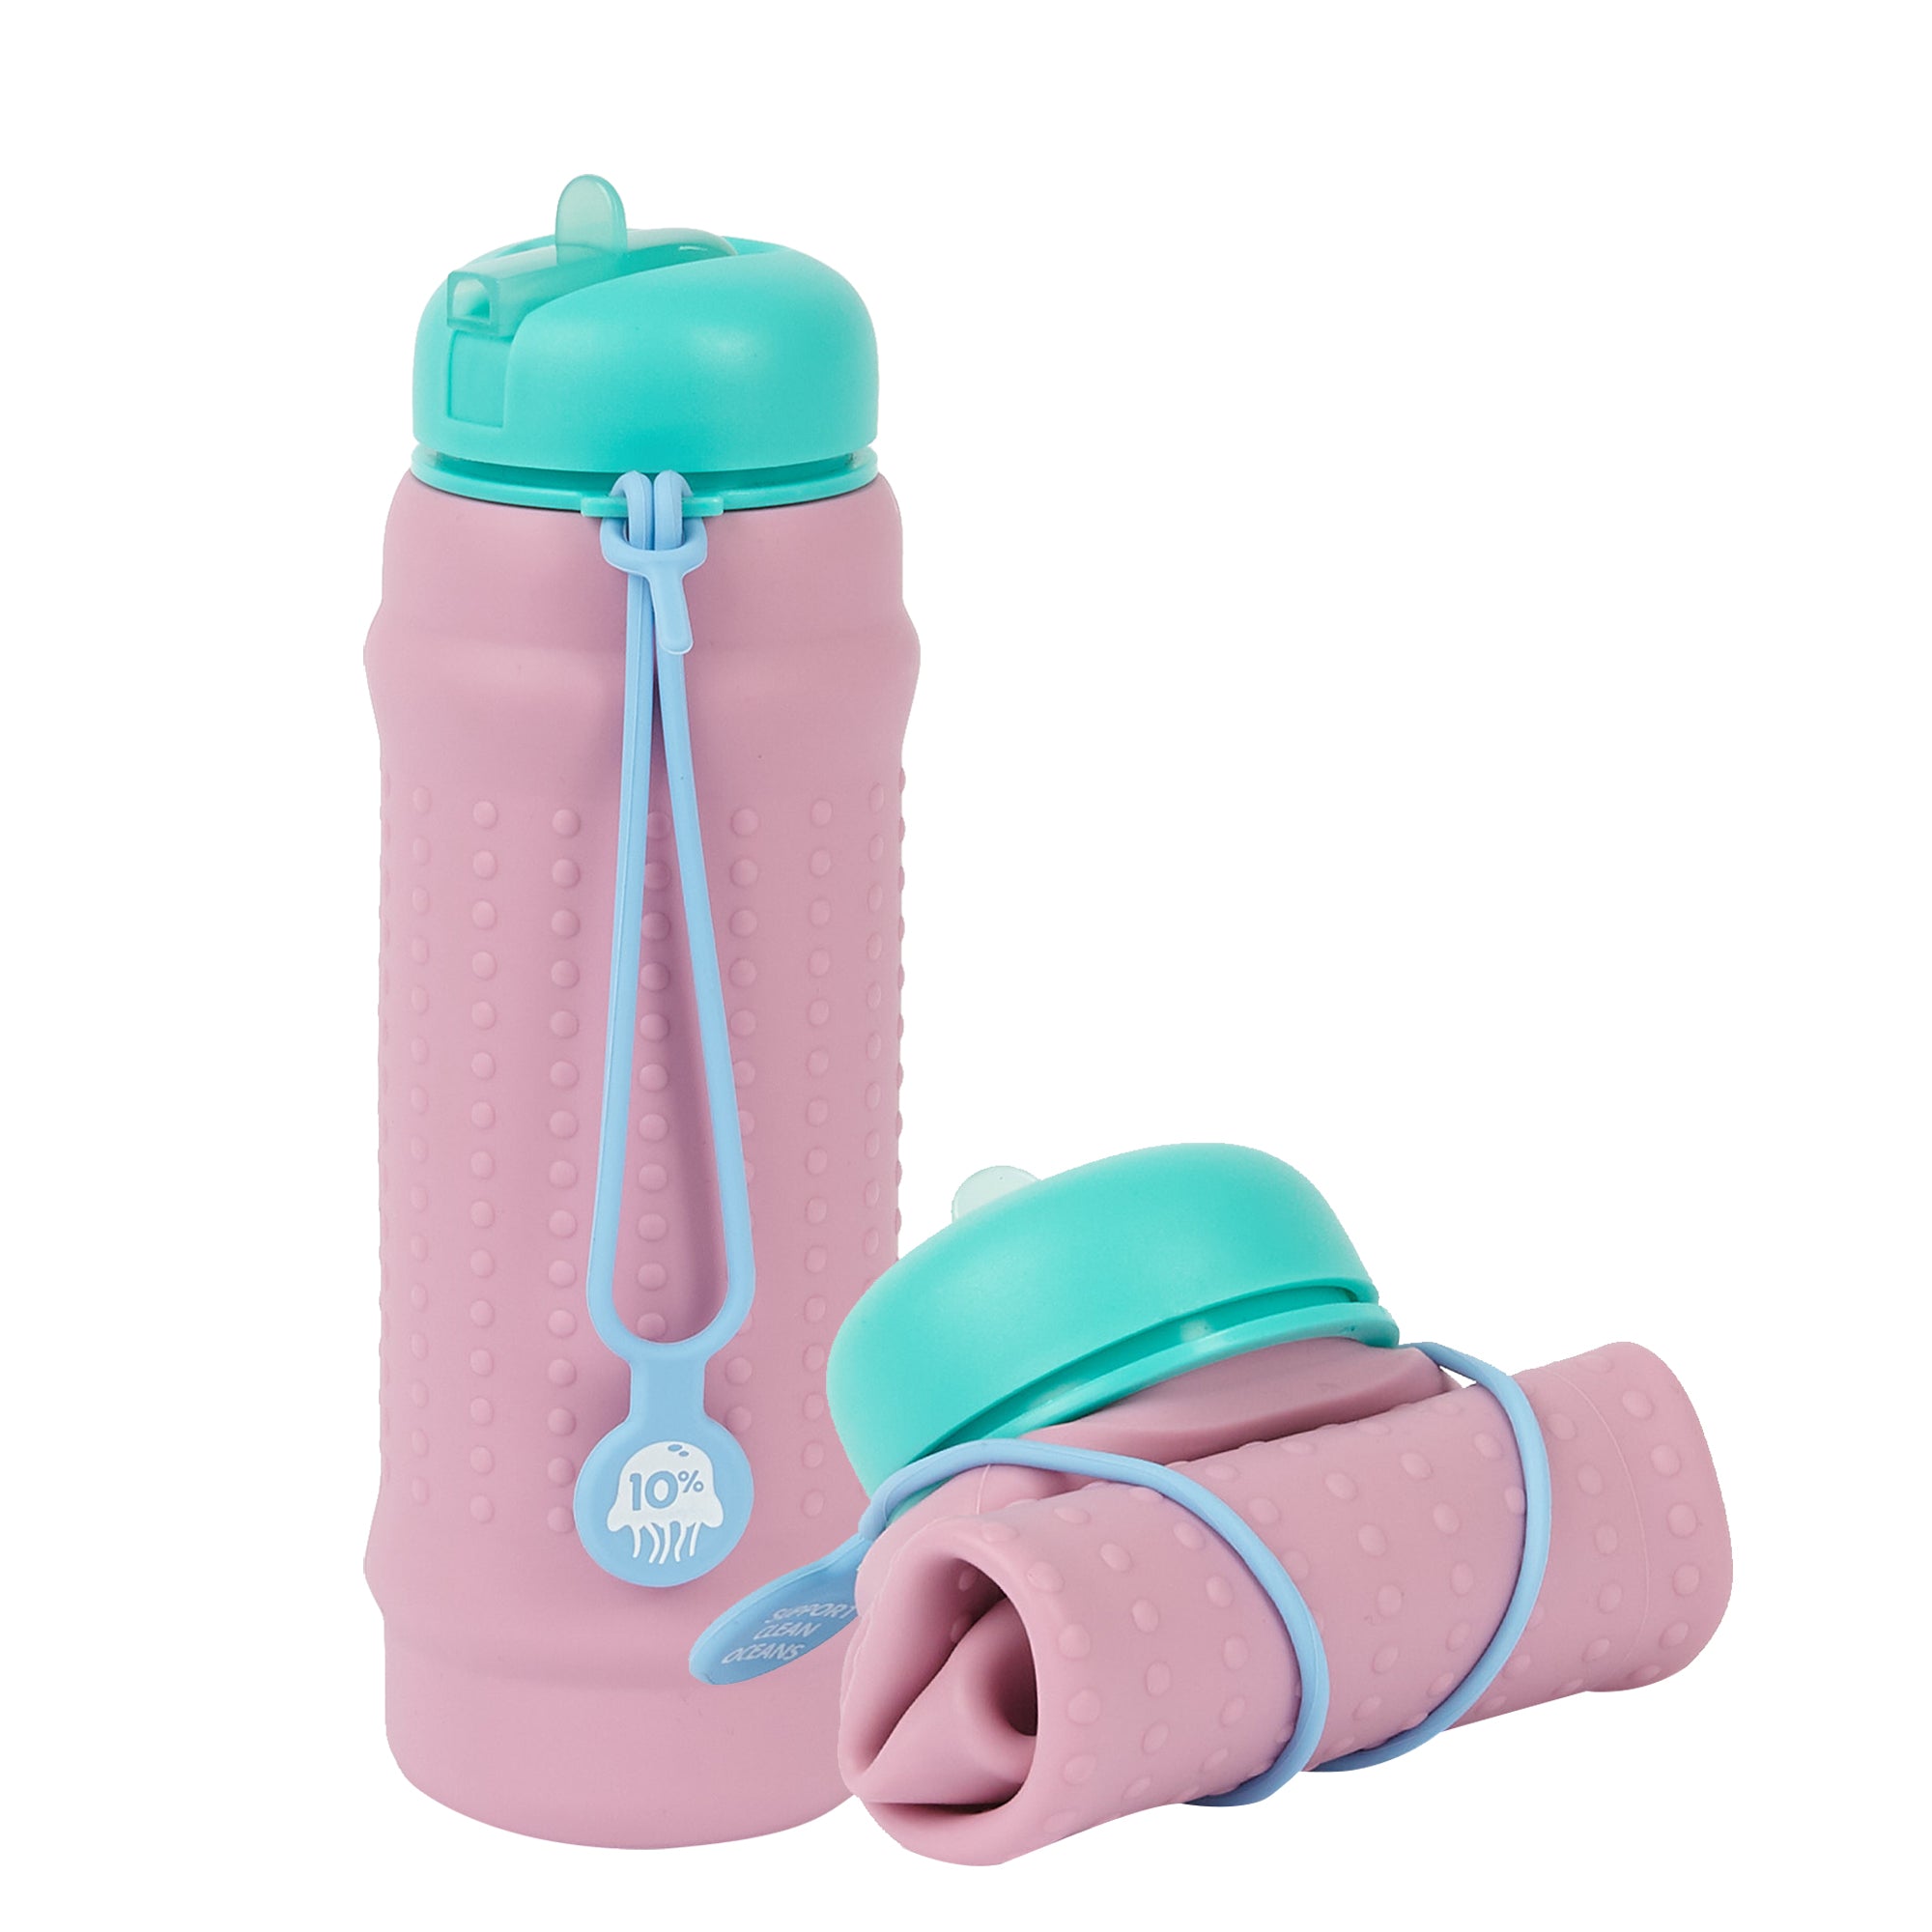 Rolla Bottle - Pink Lilac, Teal Lid + Dusty Blue Strap - tall and rolled